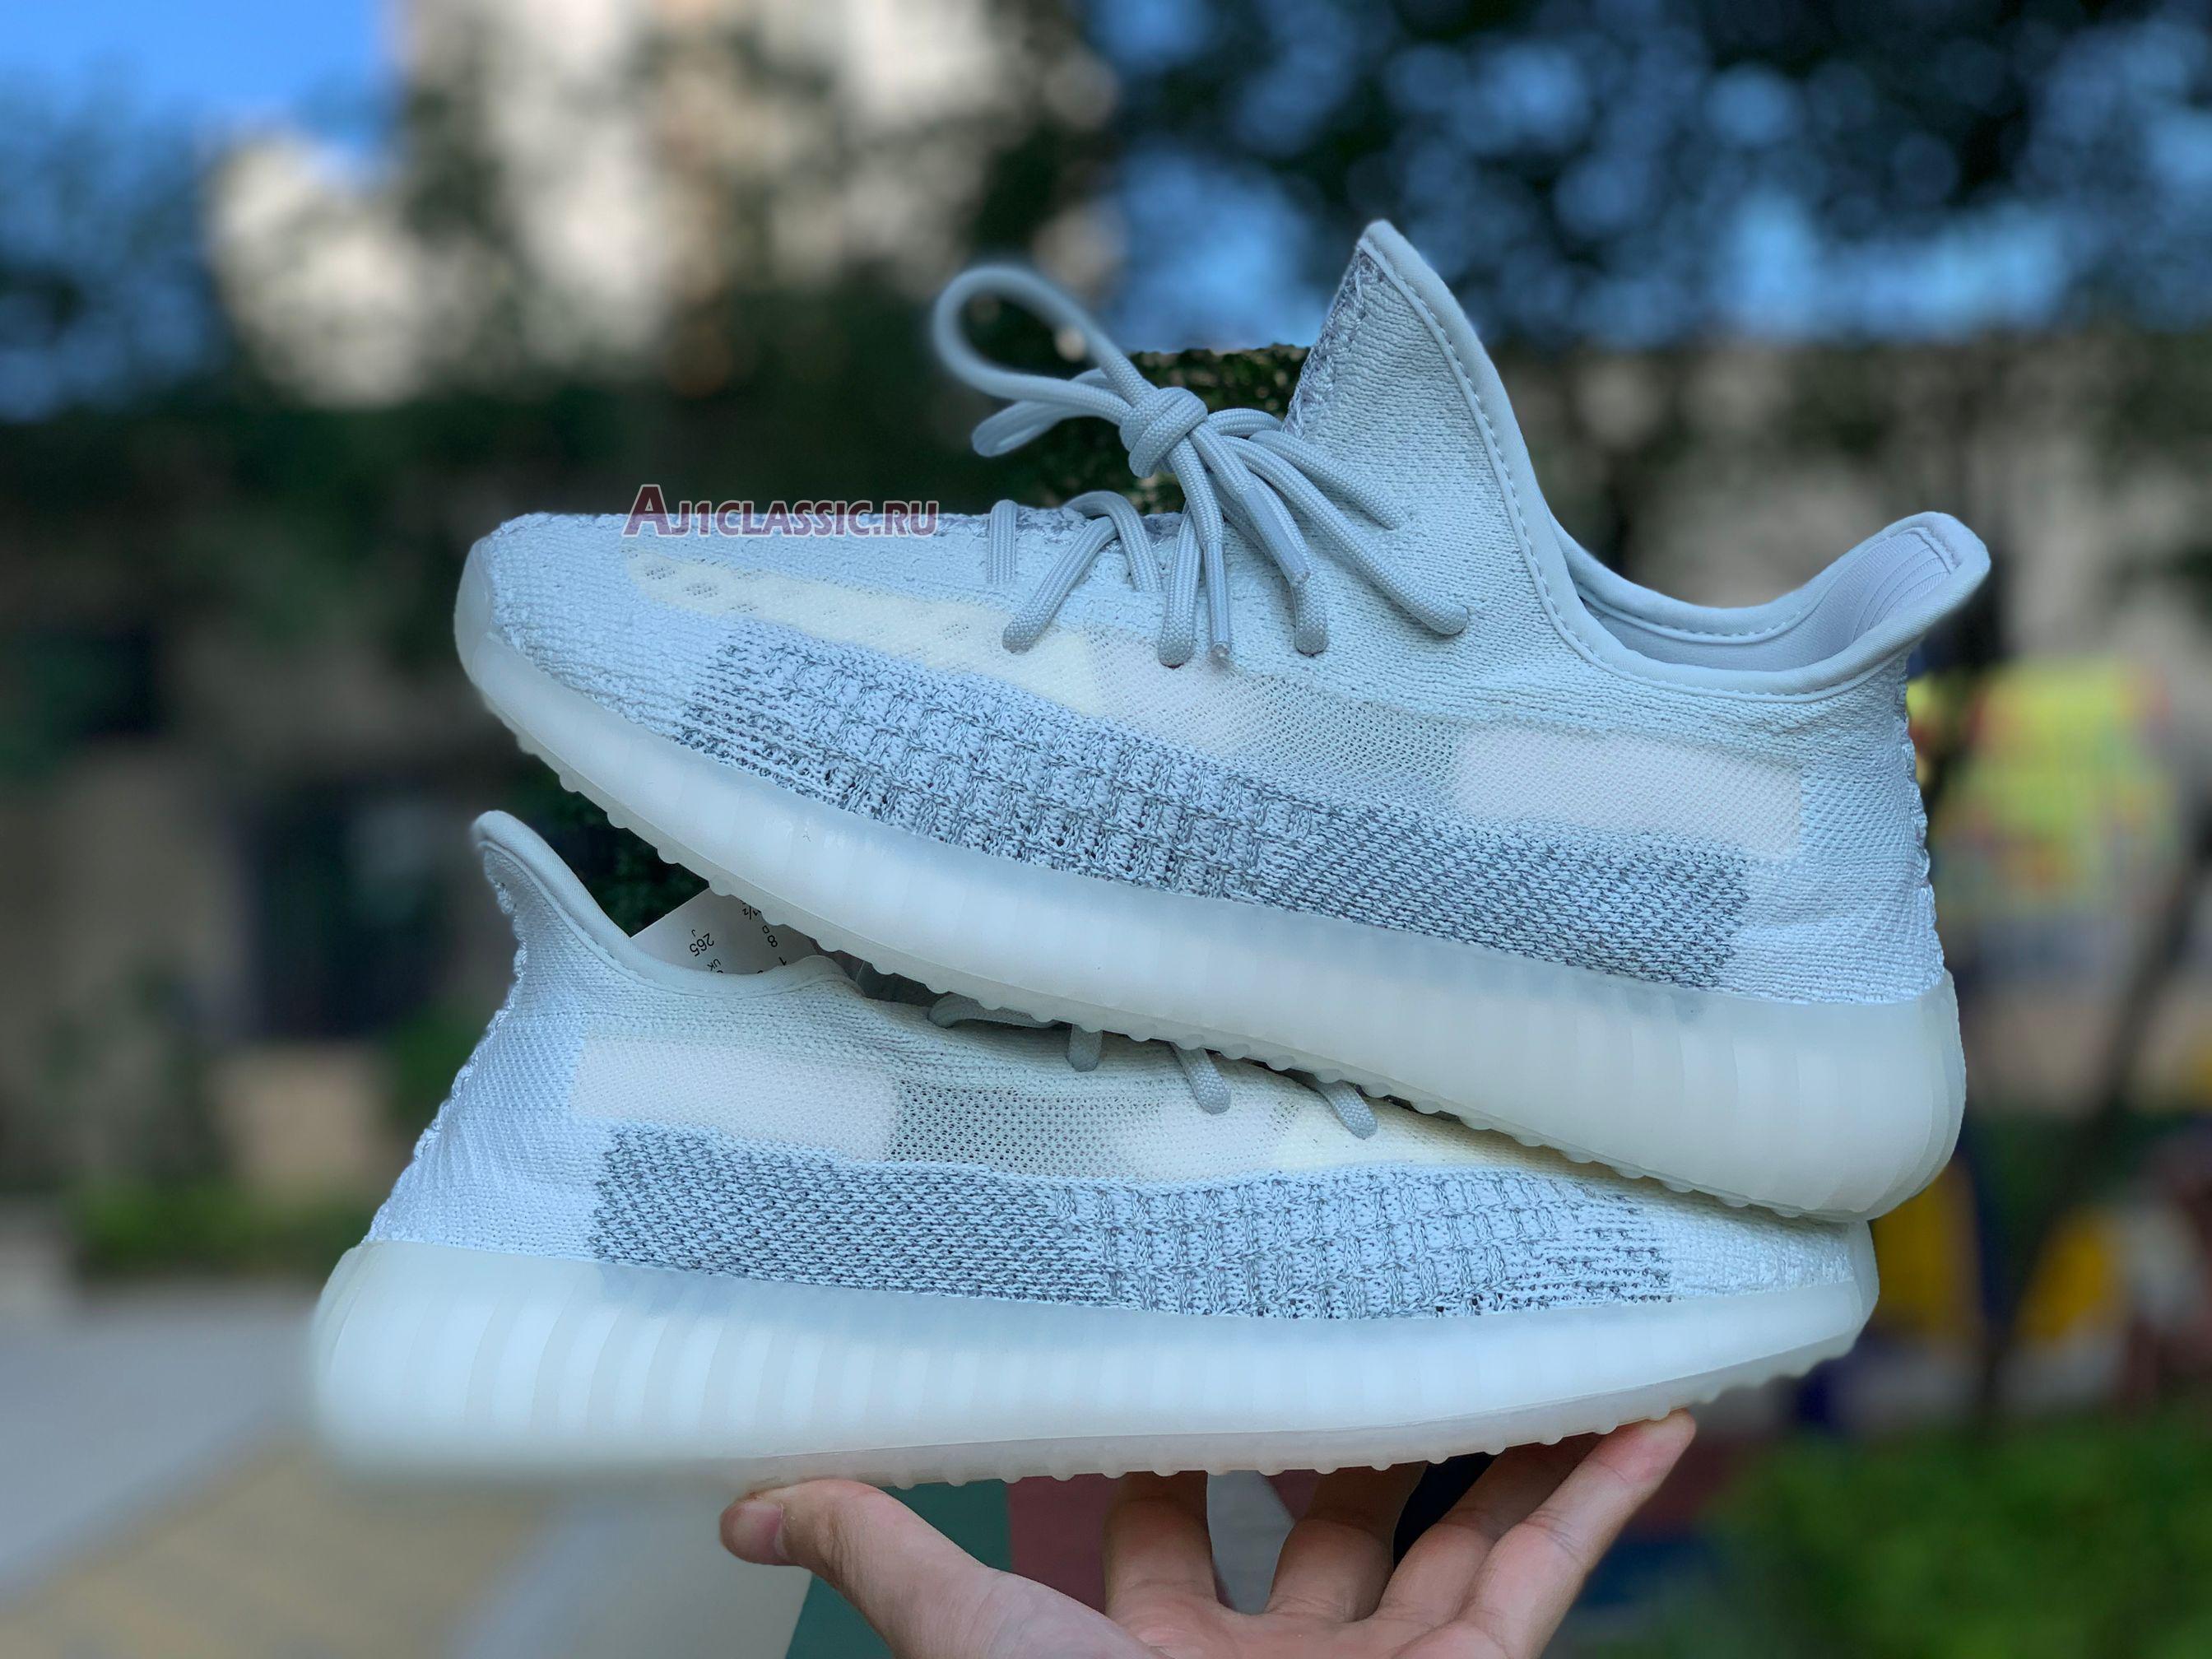 Adidas Yeezy Boost 350 V2 Cloud White Reflective FW5317 Cloud White Reflective/Cloud White Reflective Sneakers